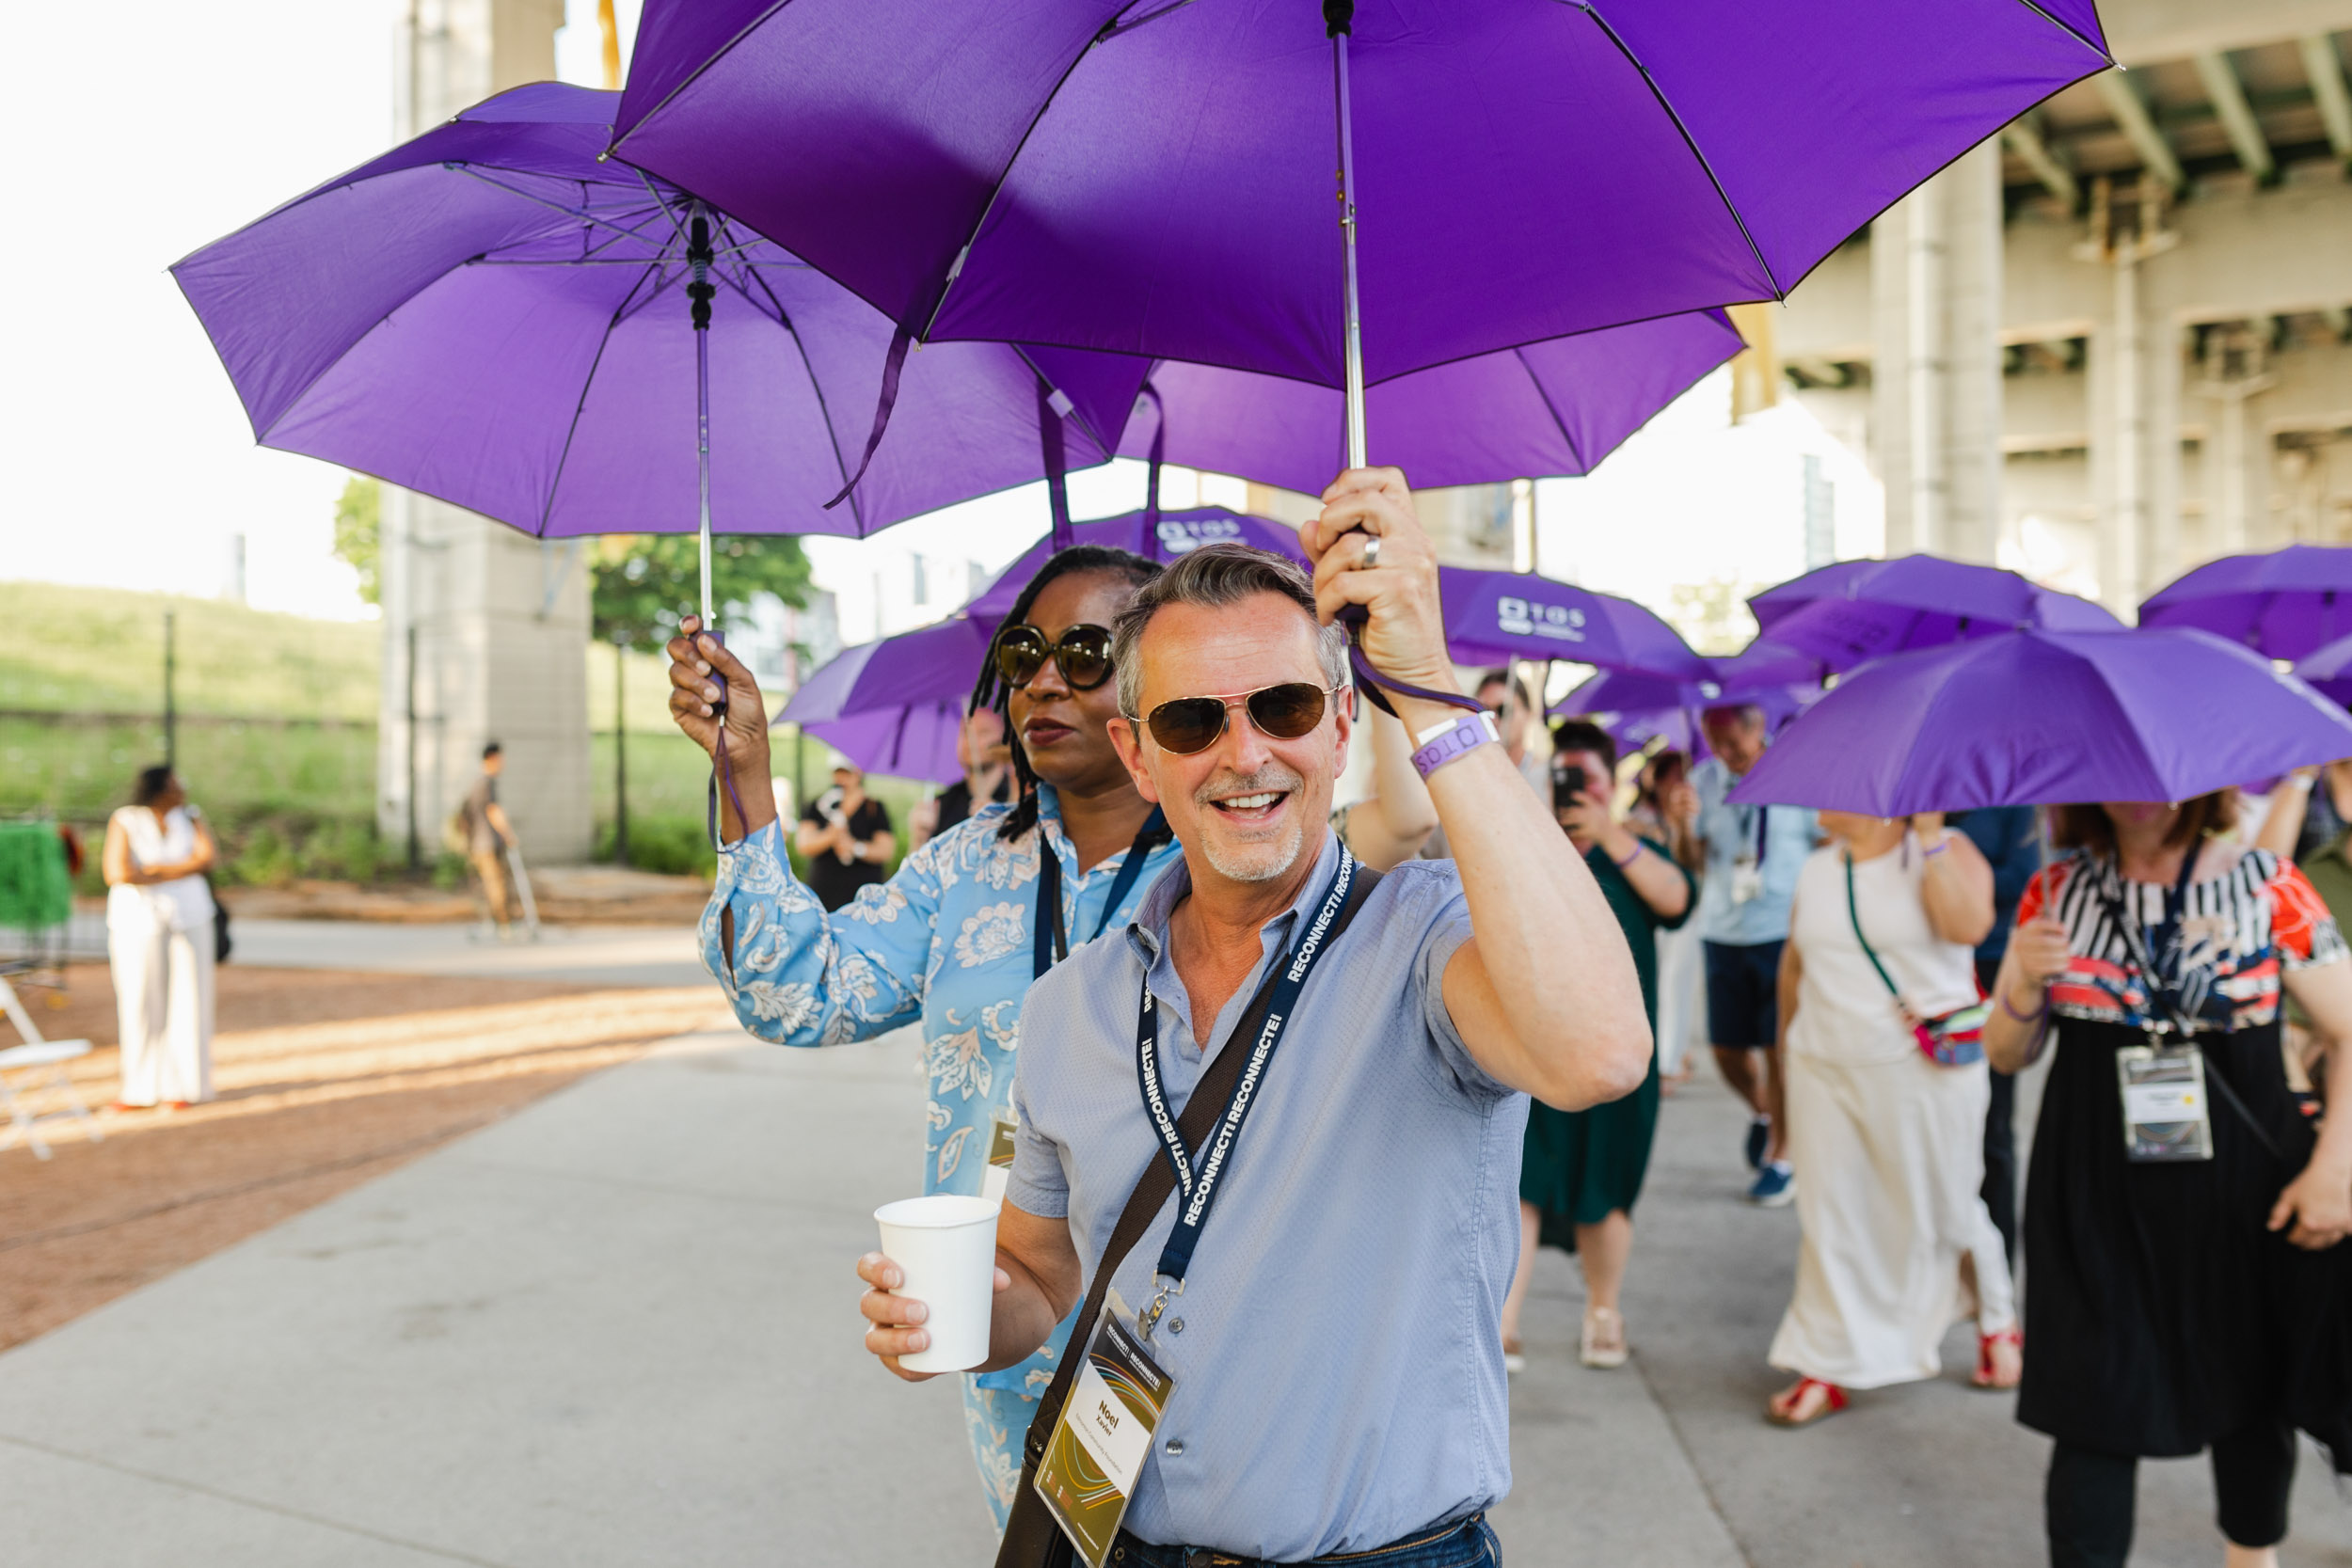 Conference attendees holding purple umbrellas.